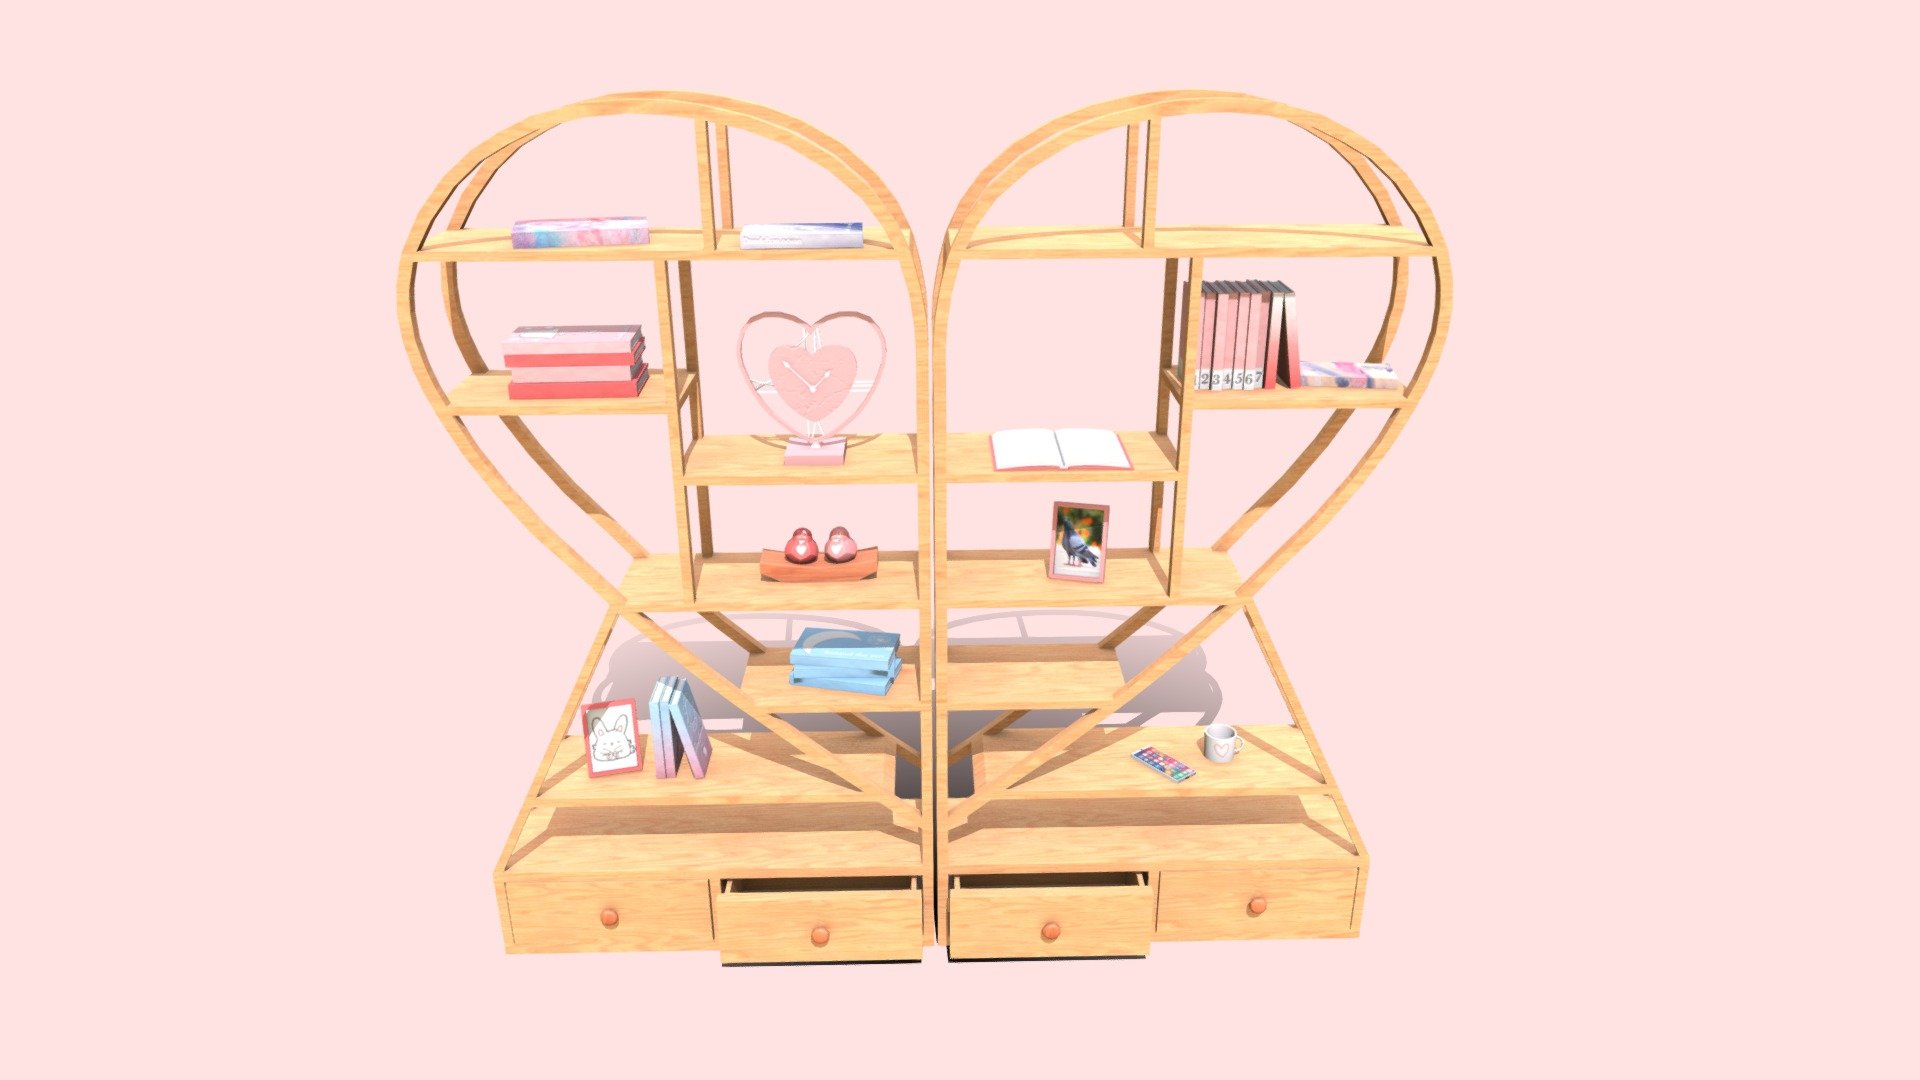 This is model of the shelf in shape of hearth. Model was made as a low poly.

This asset pack contains:

Model of the shelf and decoration which is on it.

Technical information:

Texture 2048x2048 ( one pack for shelf, one pack for decoration )

Shelf - 3336 tris, 1708 faces, 1584 verts.

Clock - 1252 tris, 635 faces, 646 verts.

Decoration without counting clock - 1896 tris, 962 faces, 1008 verts.

Contact details:

lukas.boban123@gmail.com

07591664224

https://www.facebook.com/lukas.boban/

Thank you for taking look please consider leave like.

Model will be free until 21/06/2021 3d model